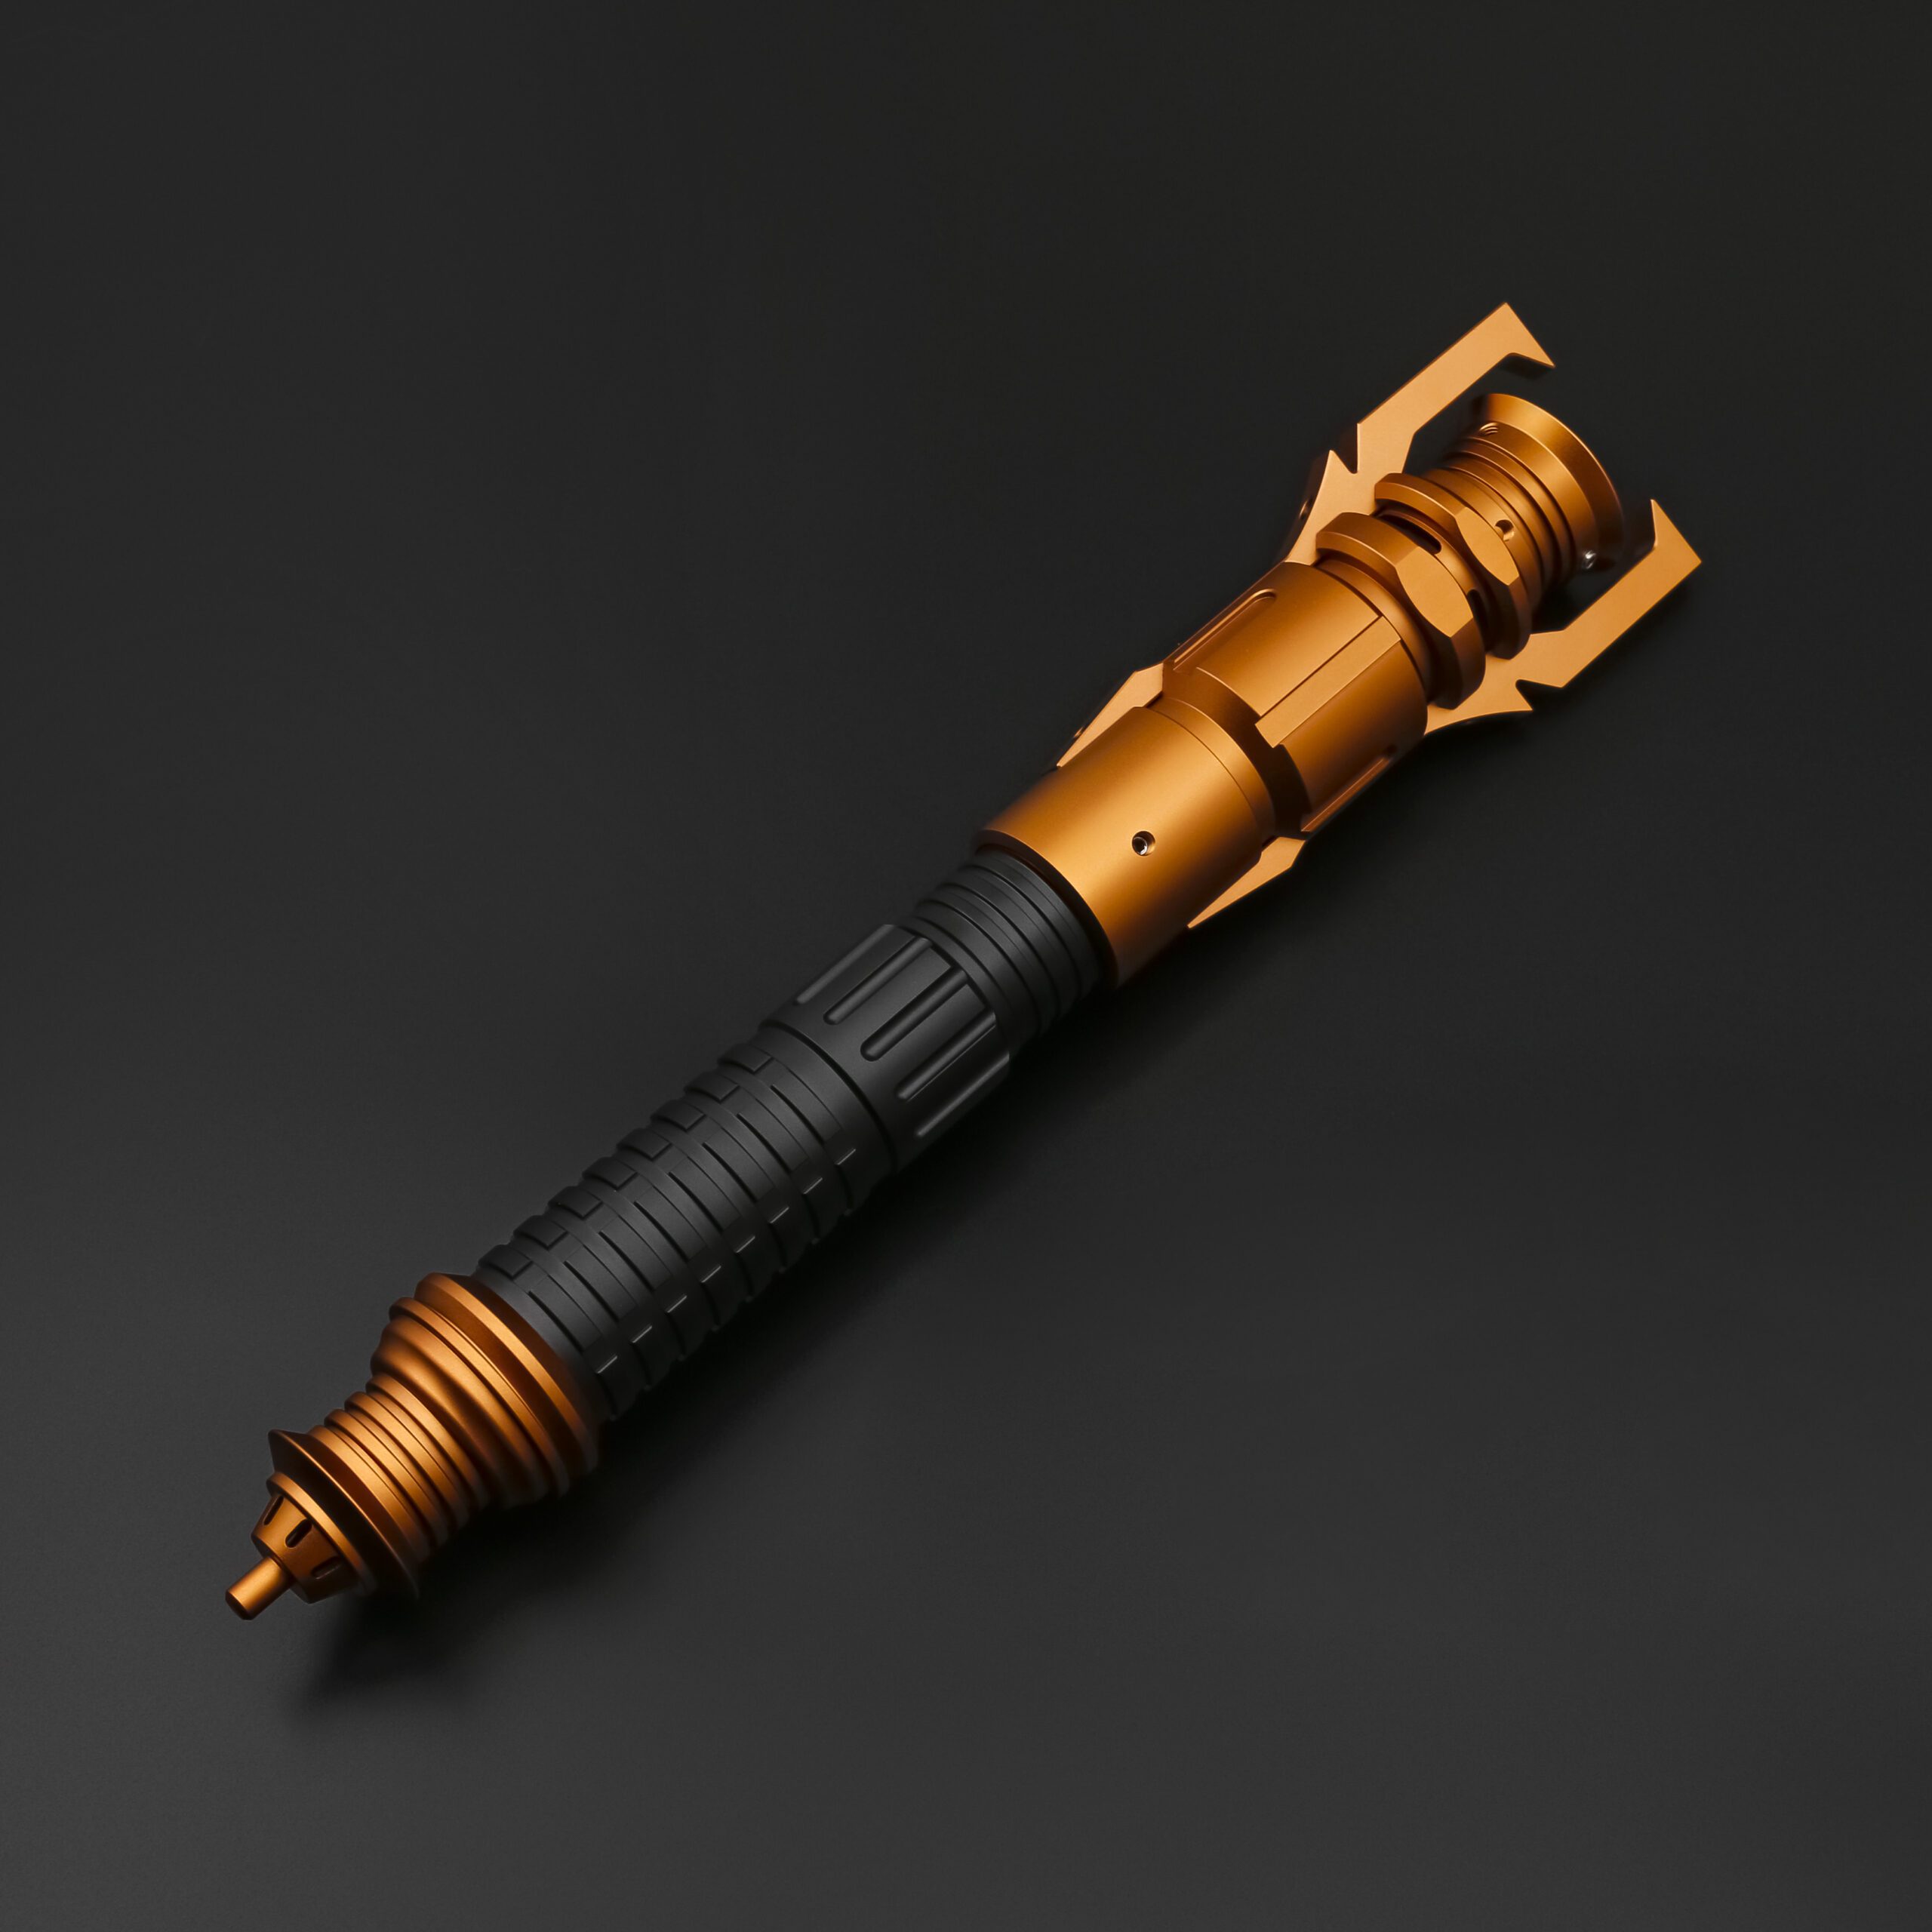 Promatic dueling lightsaber